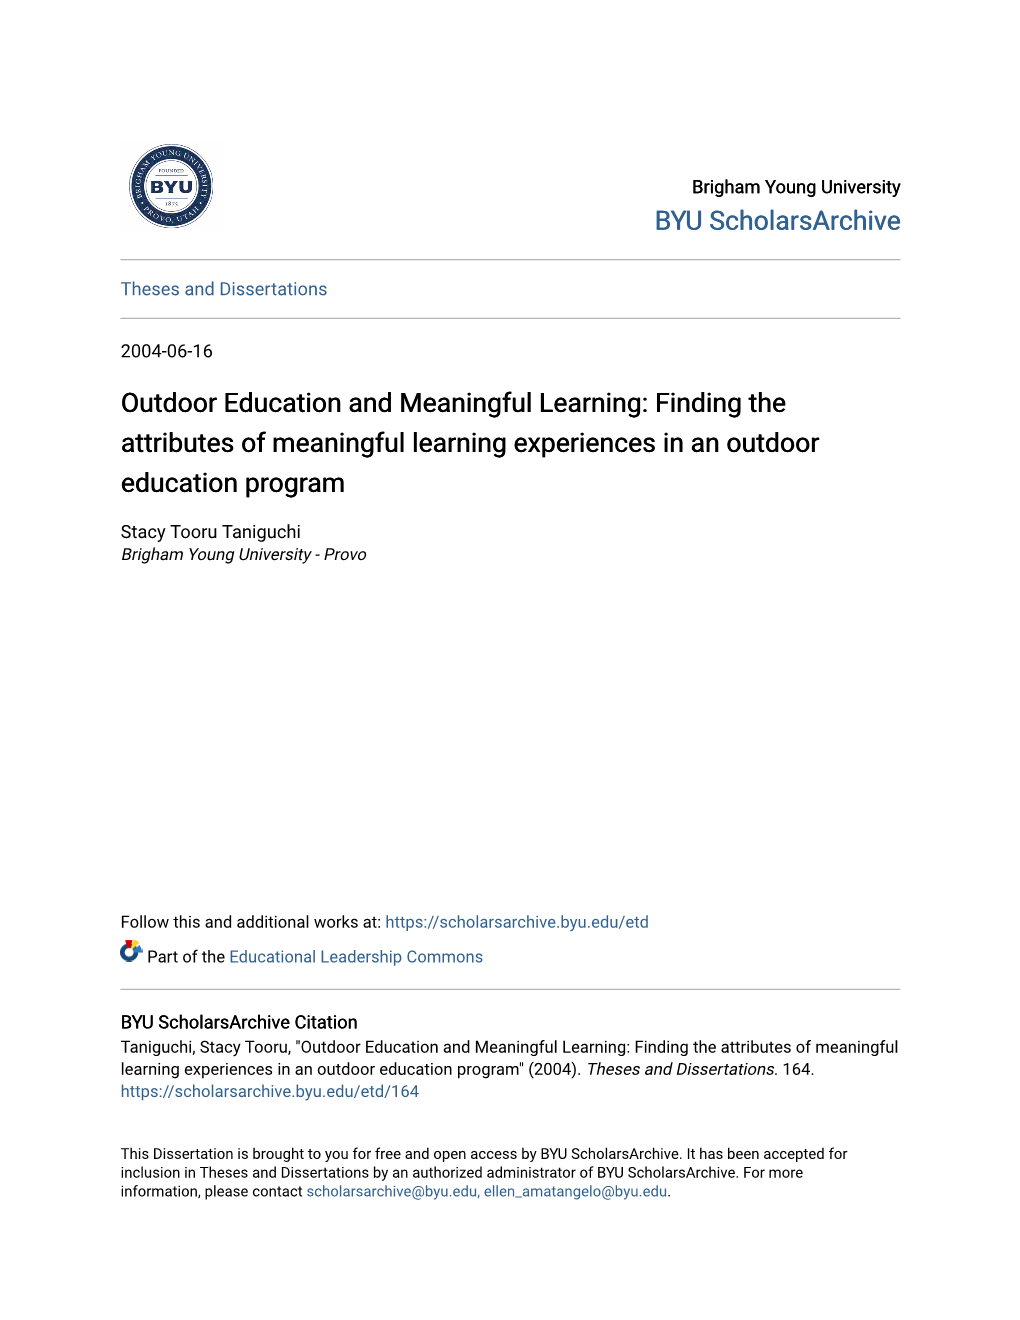 Outdoor Education and Meaningful Learning: Finding the Attributes of Meaningful Learning Experiences in an Outdoor Education Program